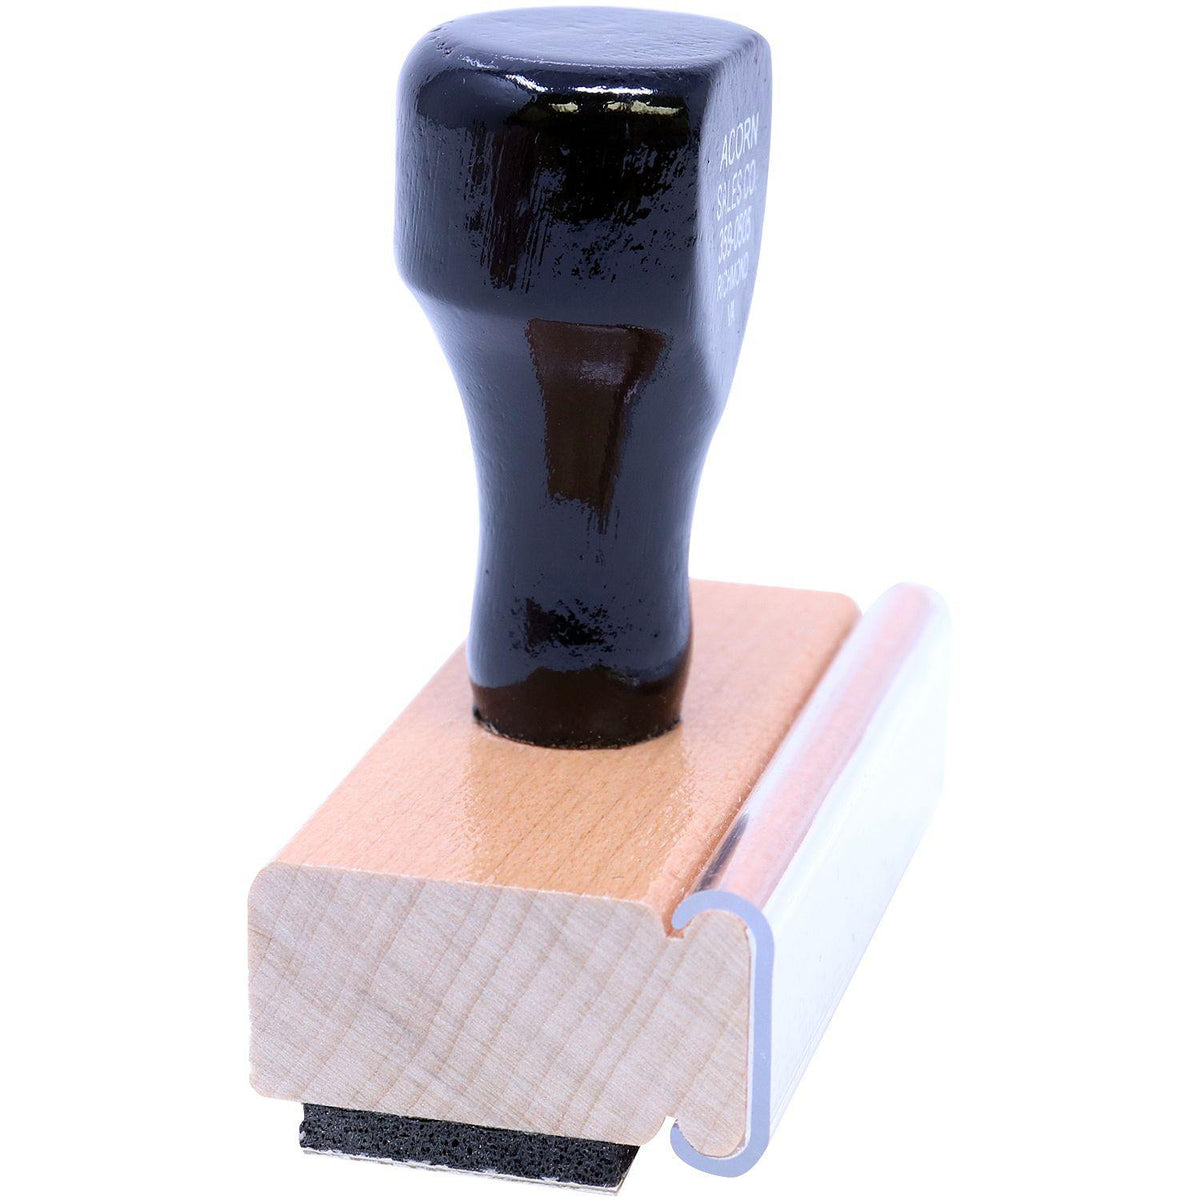 Side View of Large Revisado Rubber Stamp at an Angle